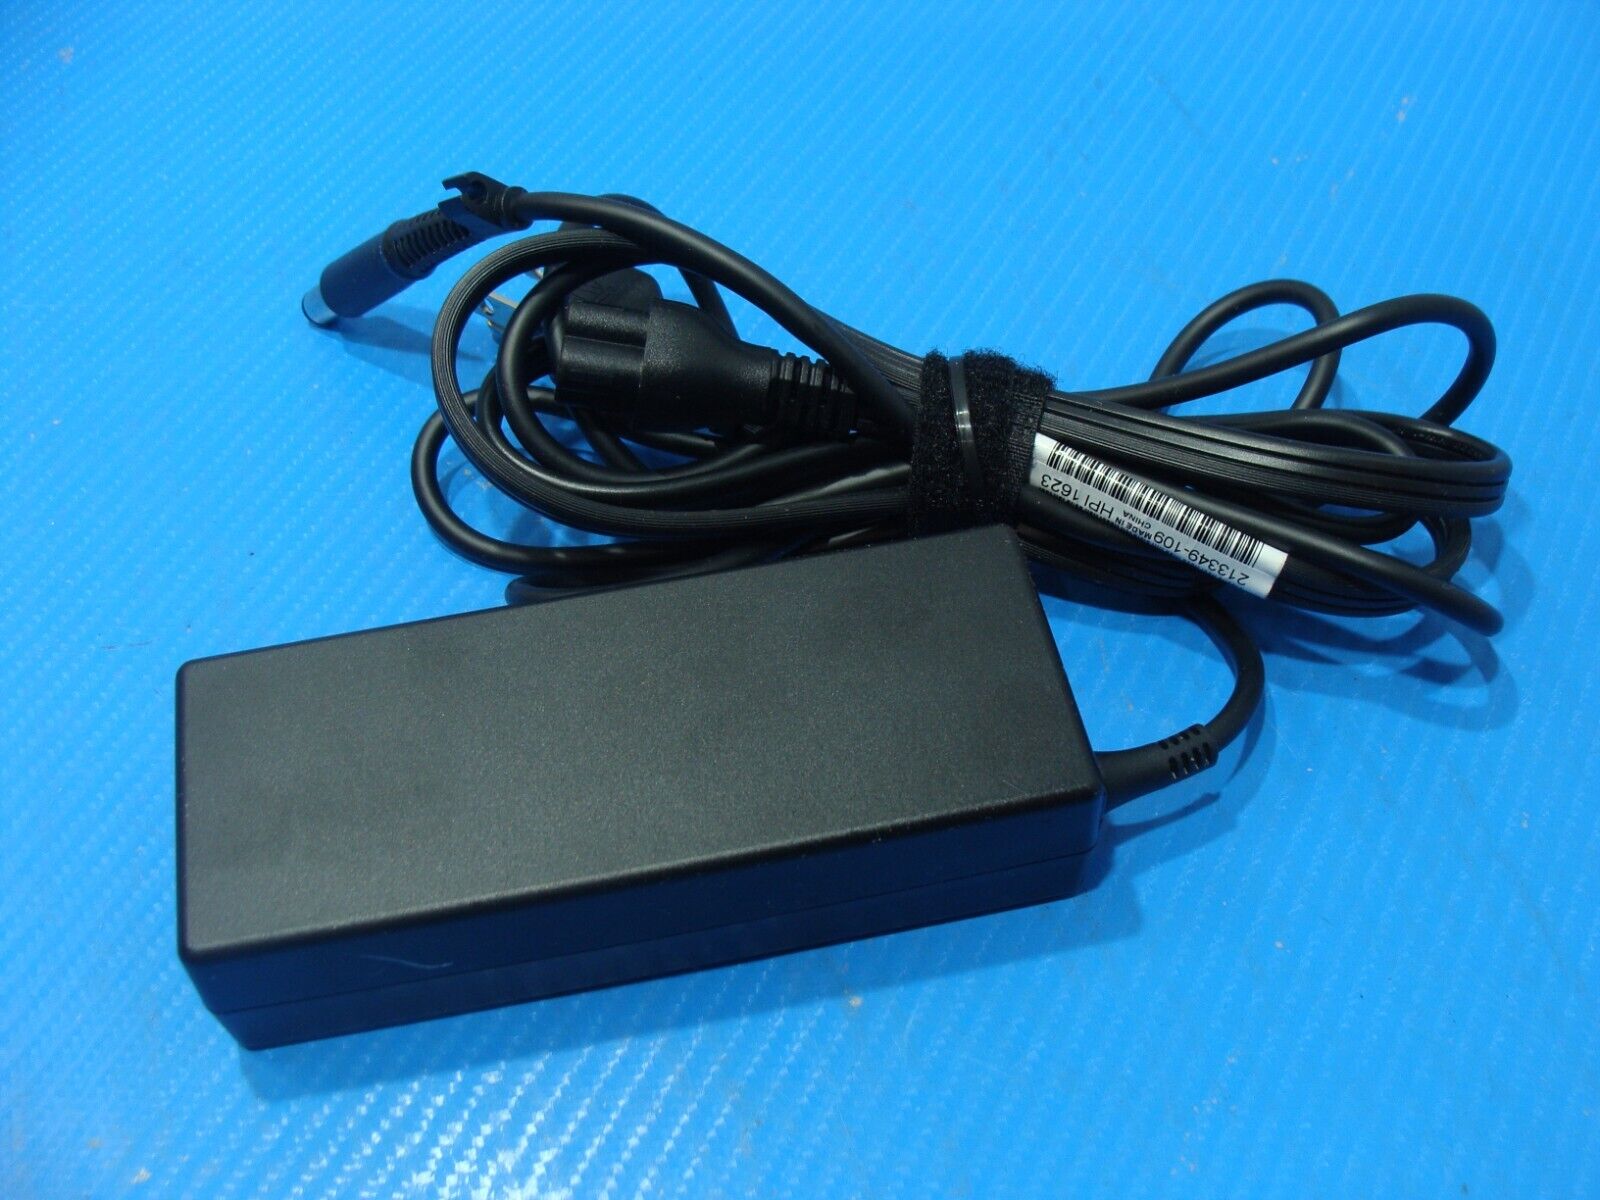 GENUINE HP 90W Laptop Charger AC Power Adapter L39754-002/L39754-003/902991-002